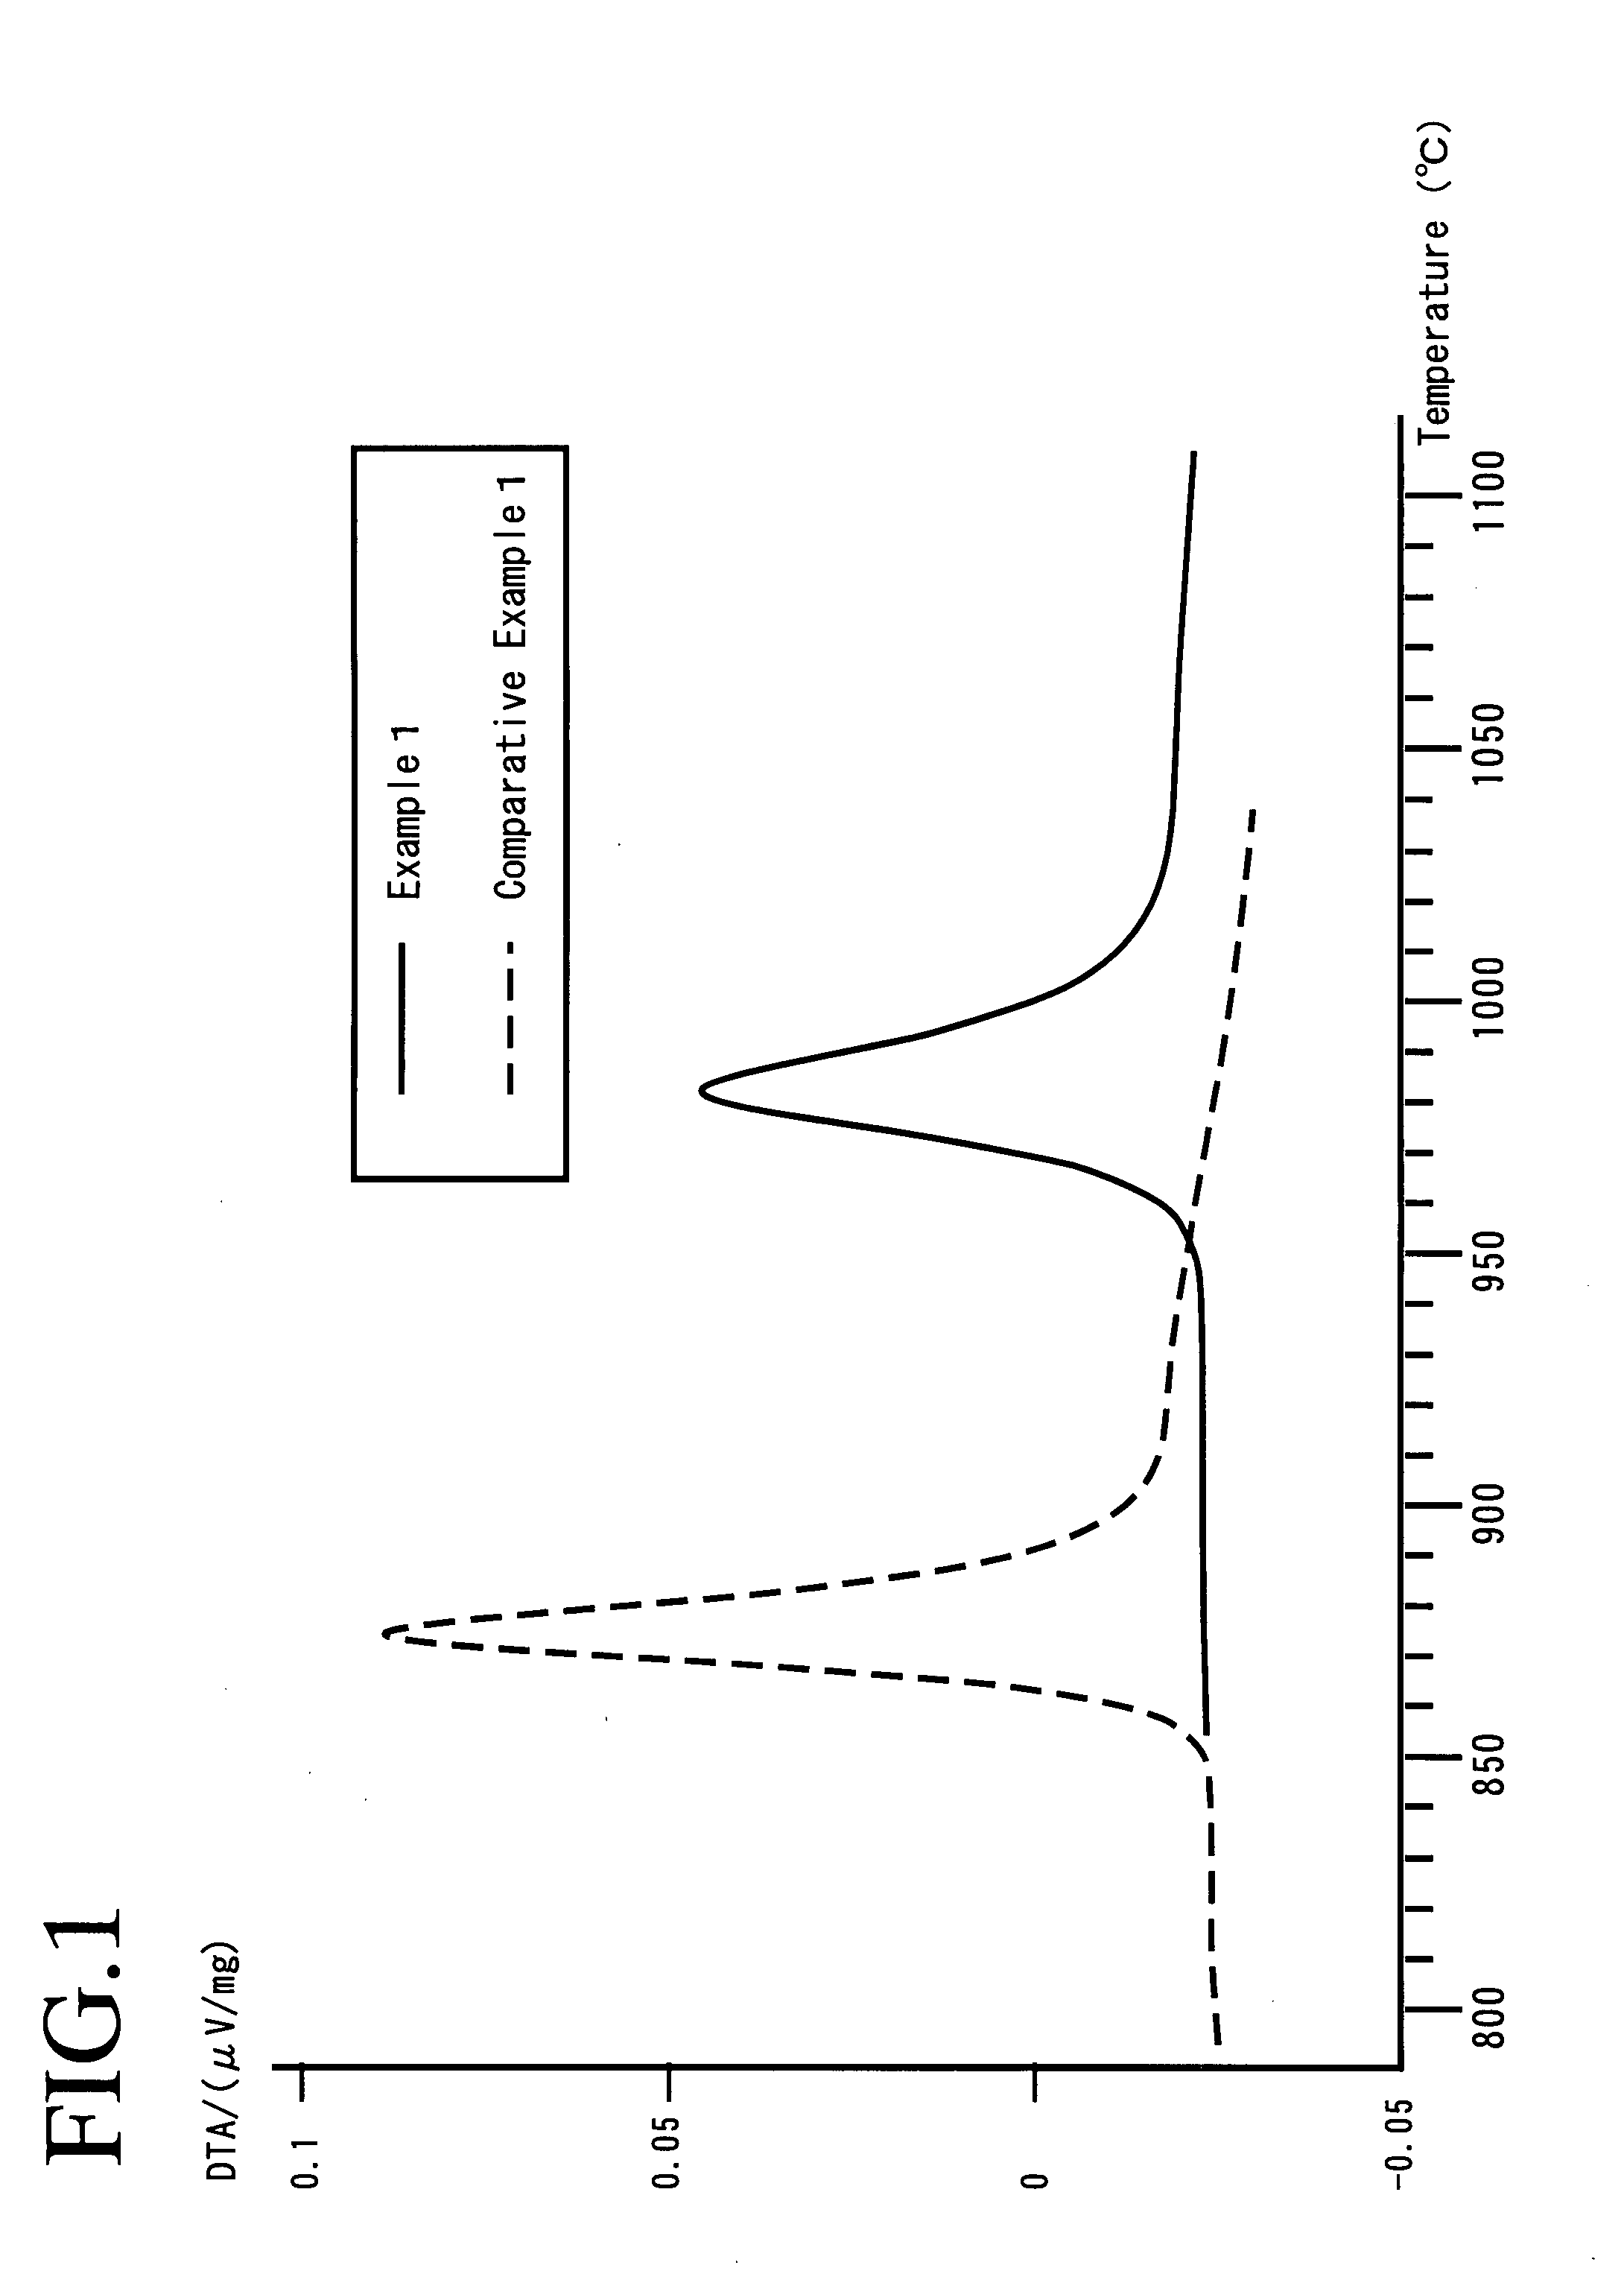 Crystallized glass, and method for producing crystallized glass